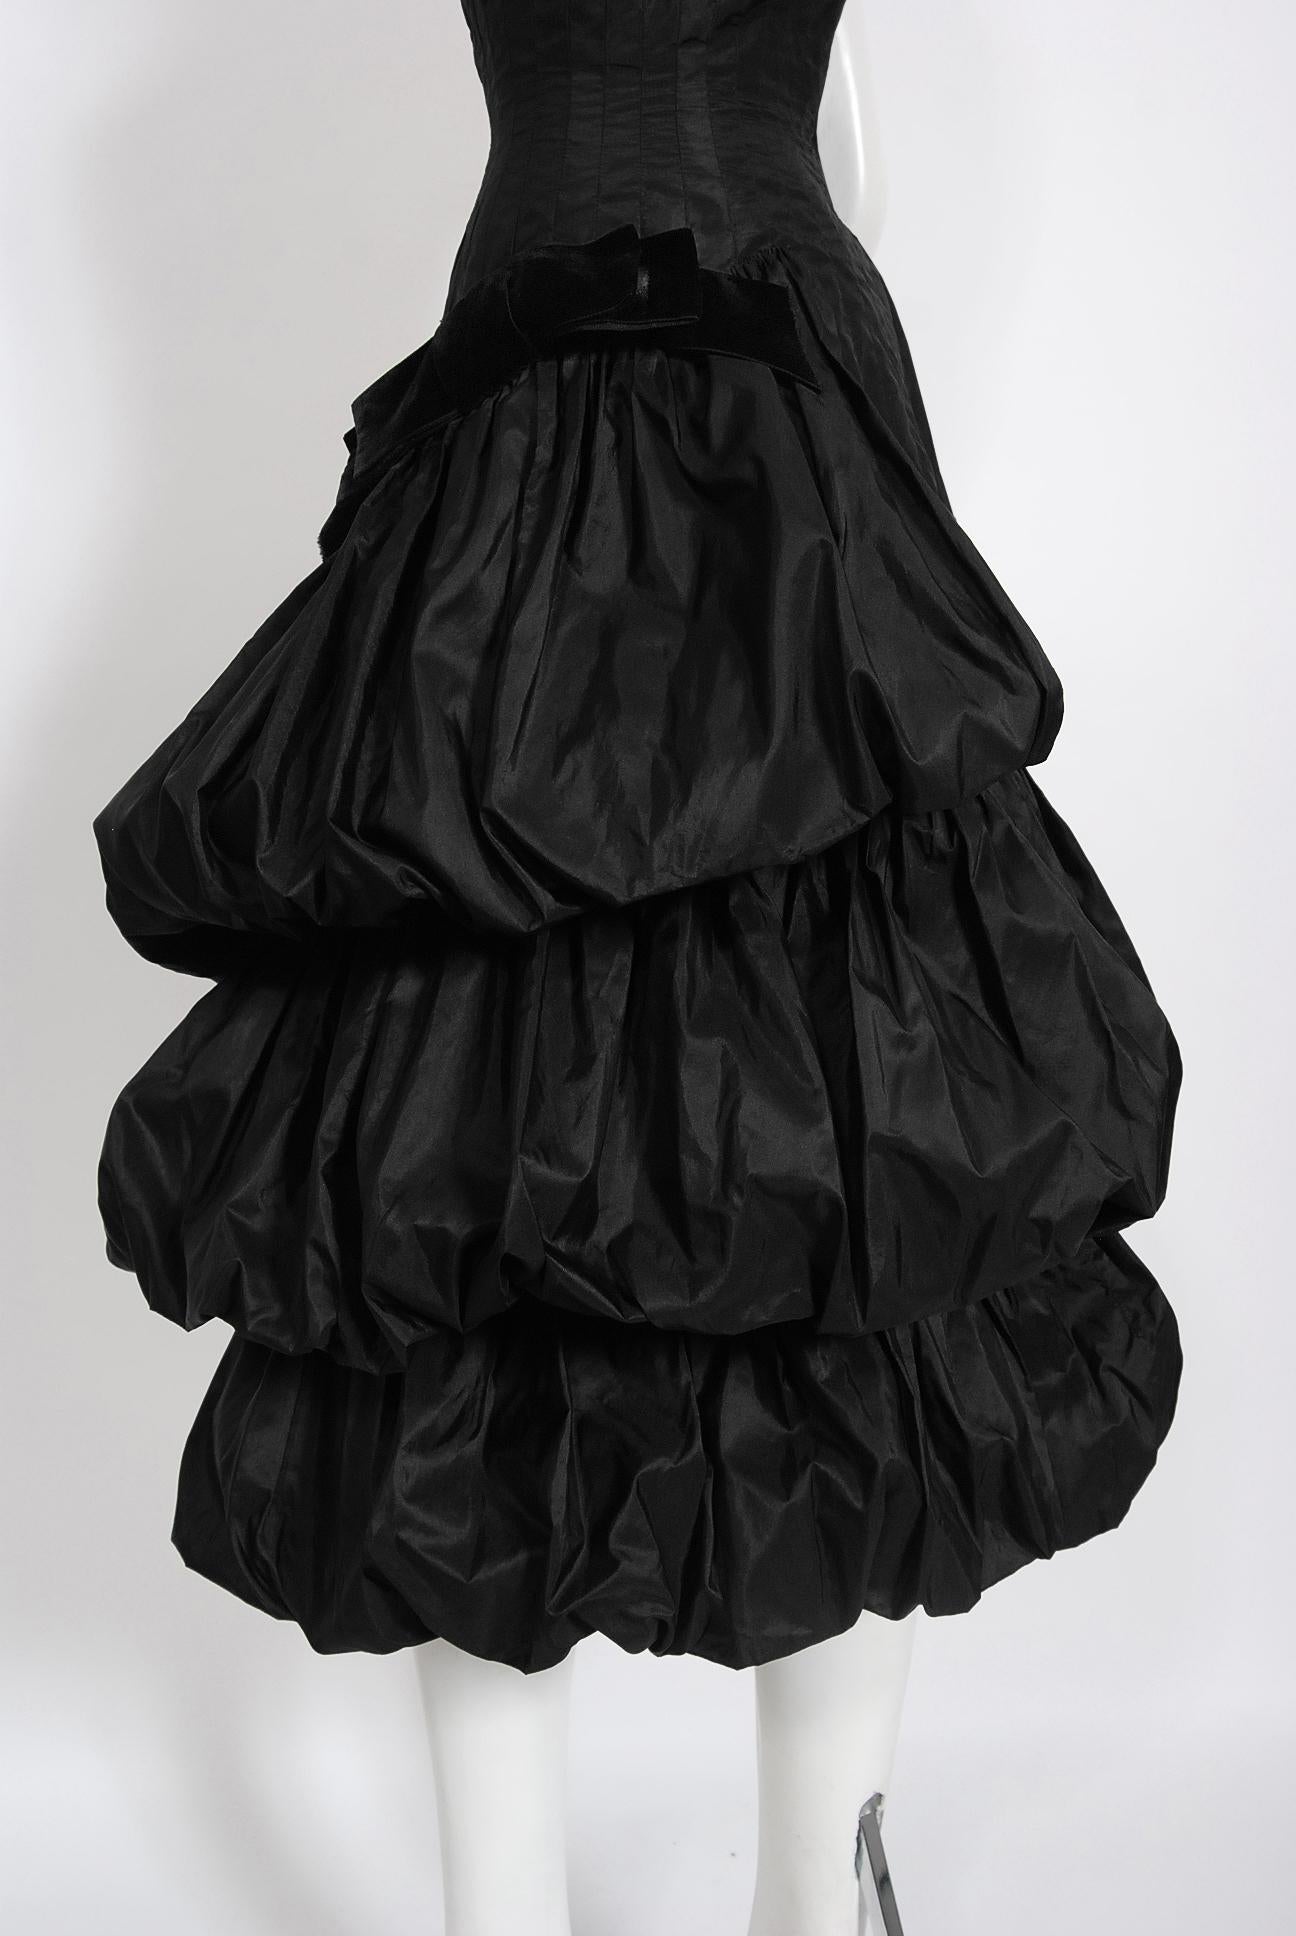 Vintage 1959 Bruxelles Couture Black Taffeta Tiered-Puff Strapless Dress  1